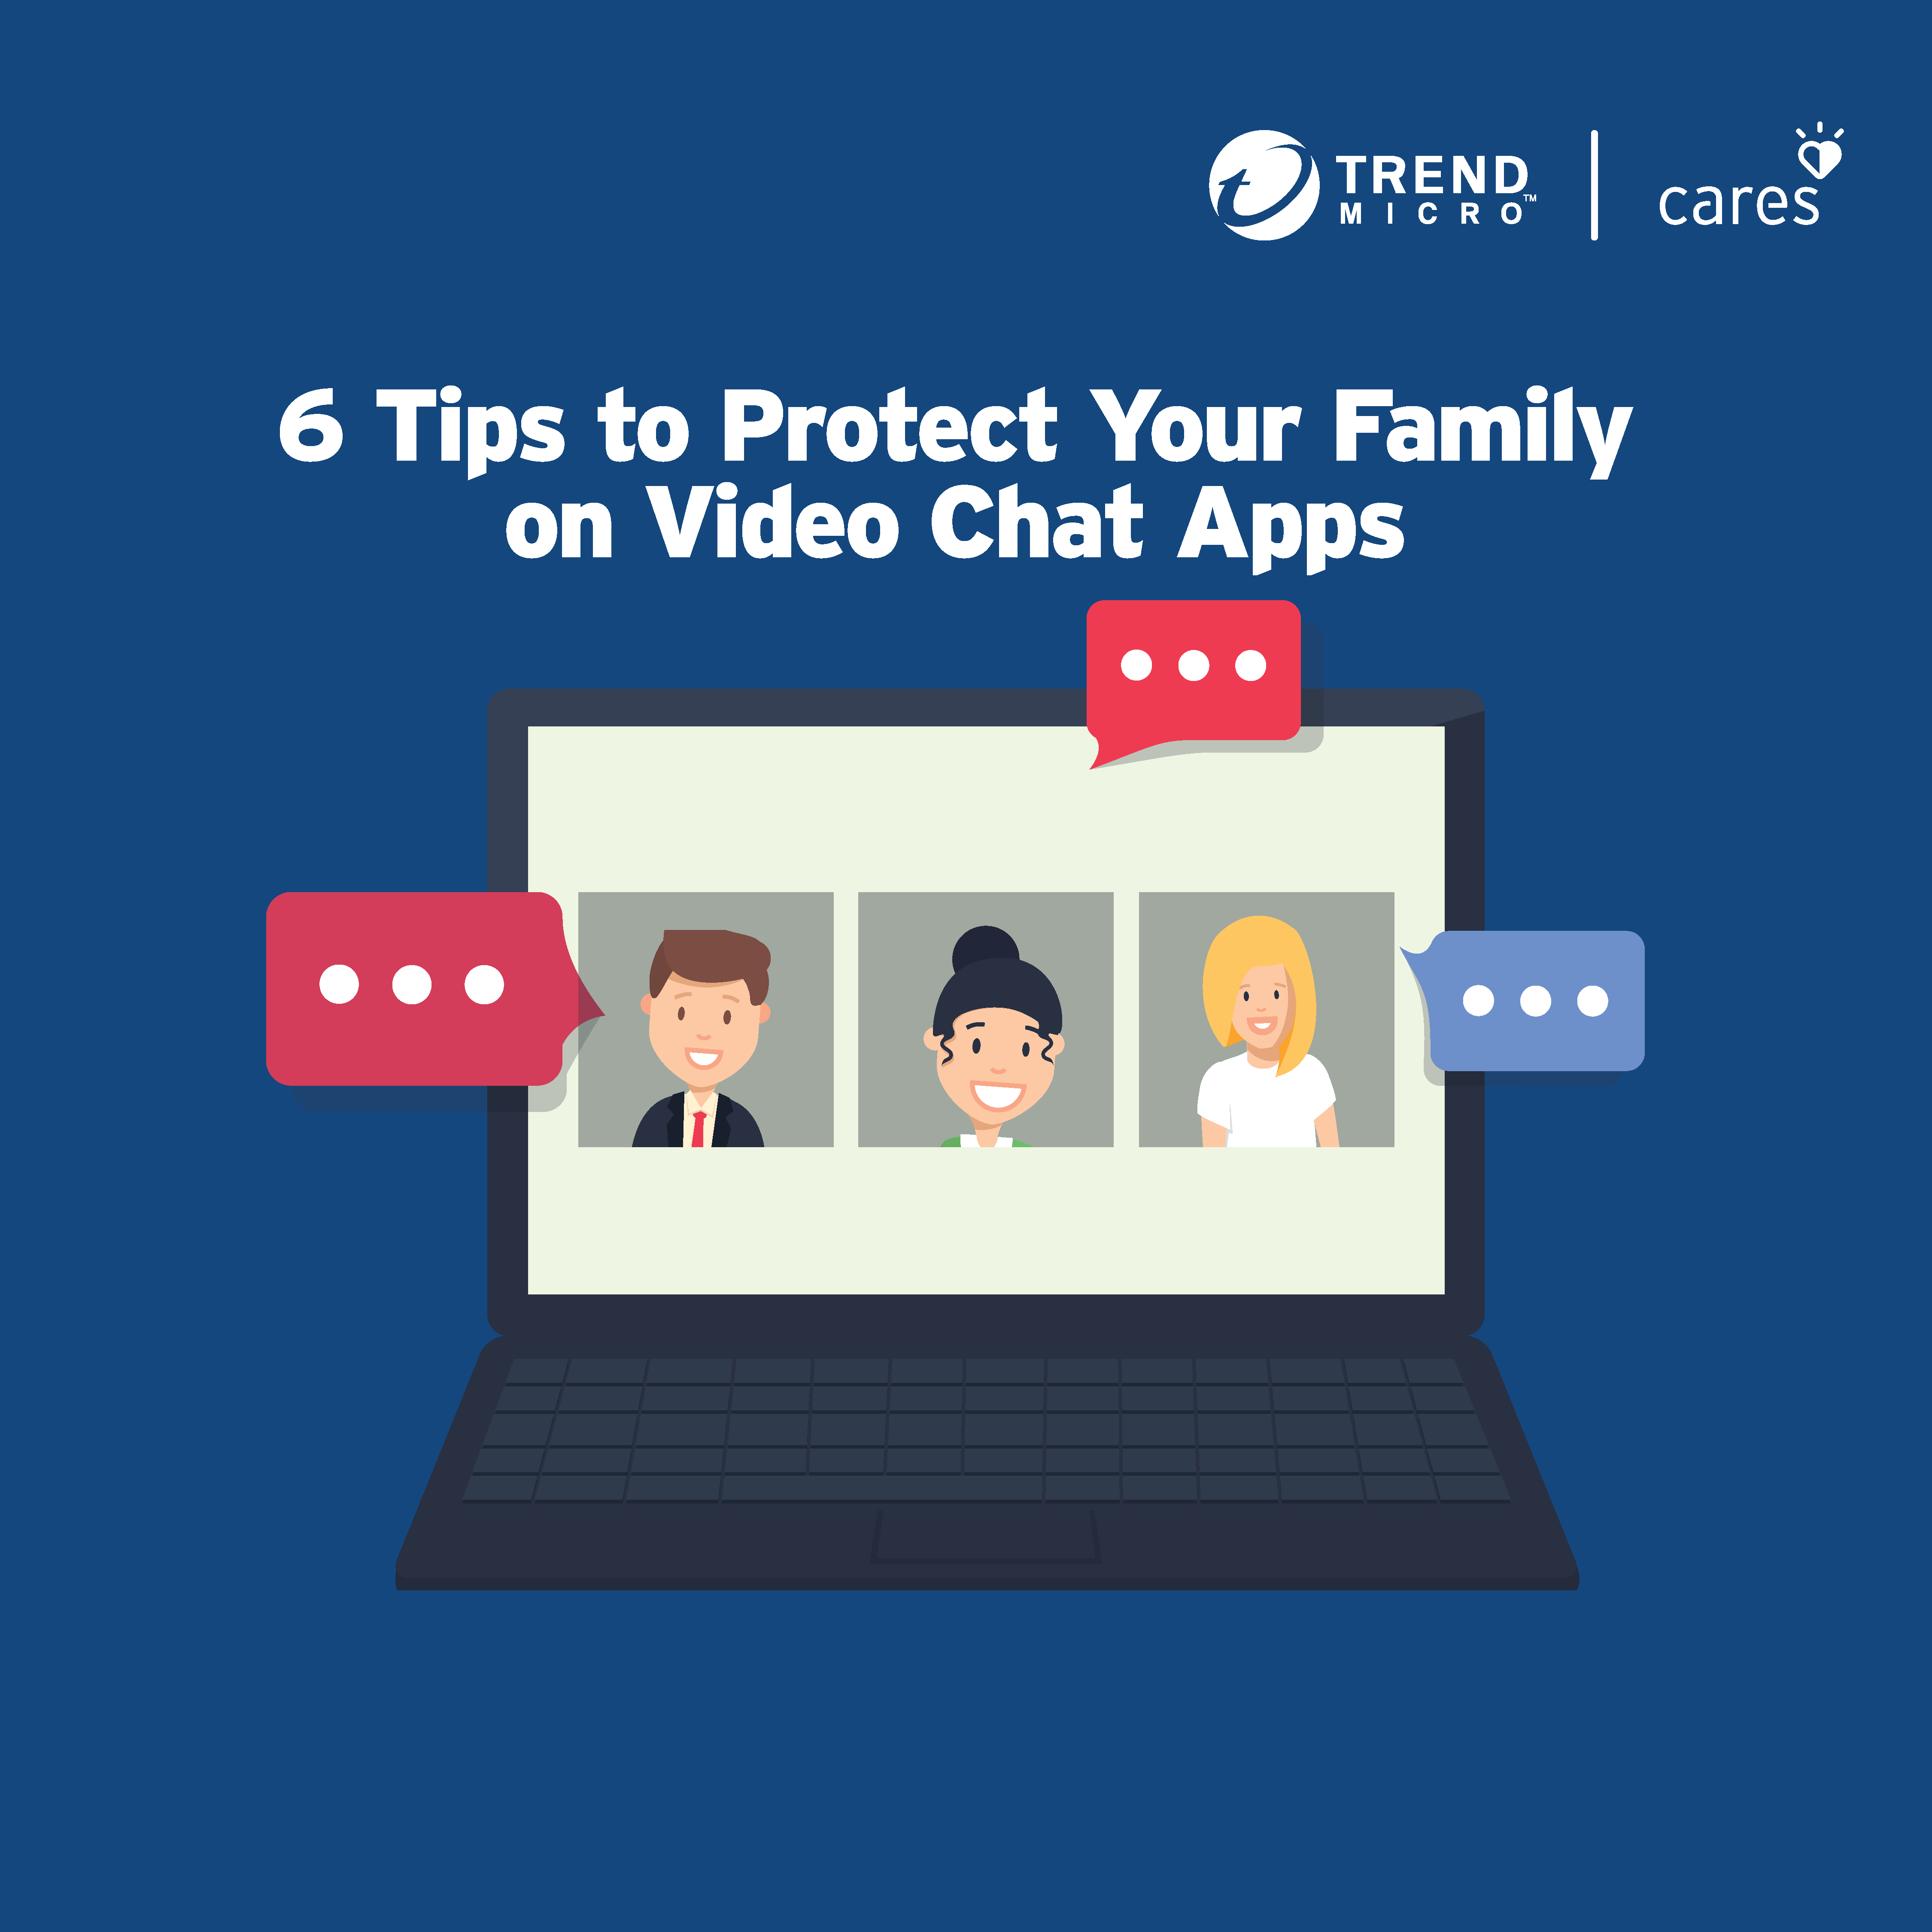 Managing Family Life Online Webinar Series - Protect Your Family on Videochat Apps